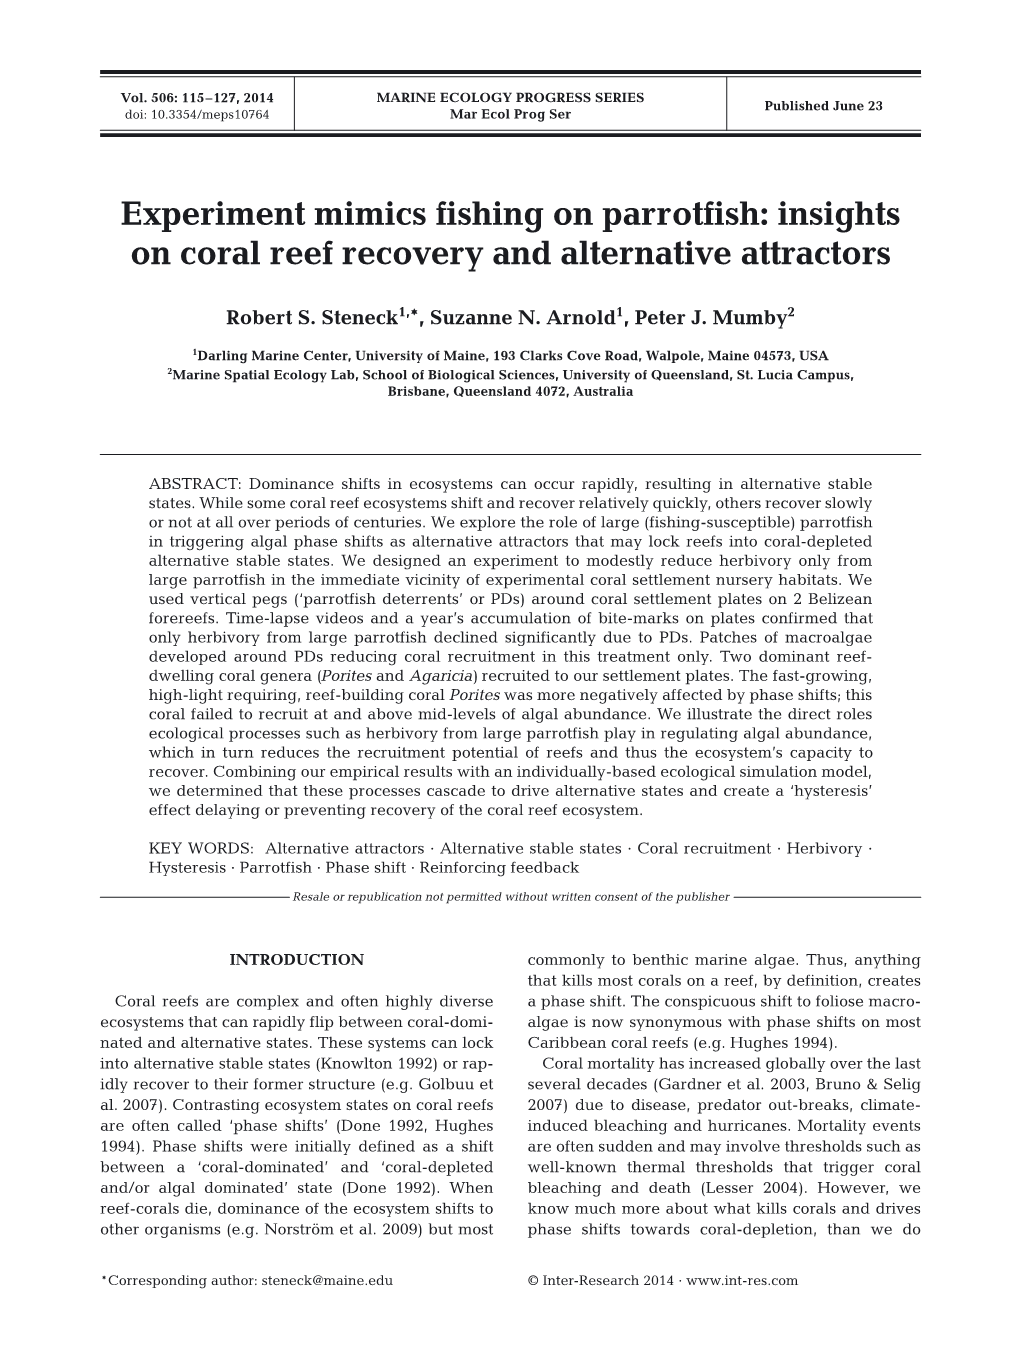 Experiment Mimics Fishing on Parrotfish: Insights on Coral Reef Recovery and Alternative Attractors